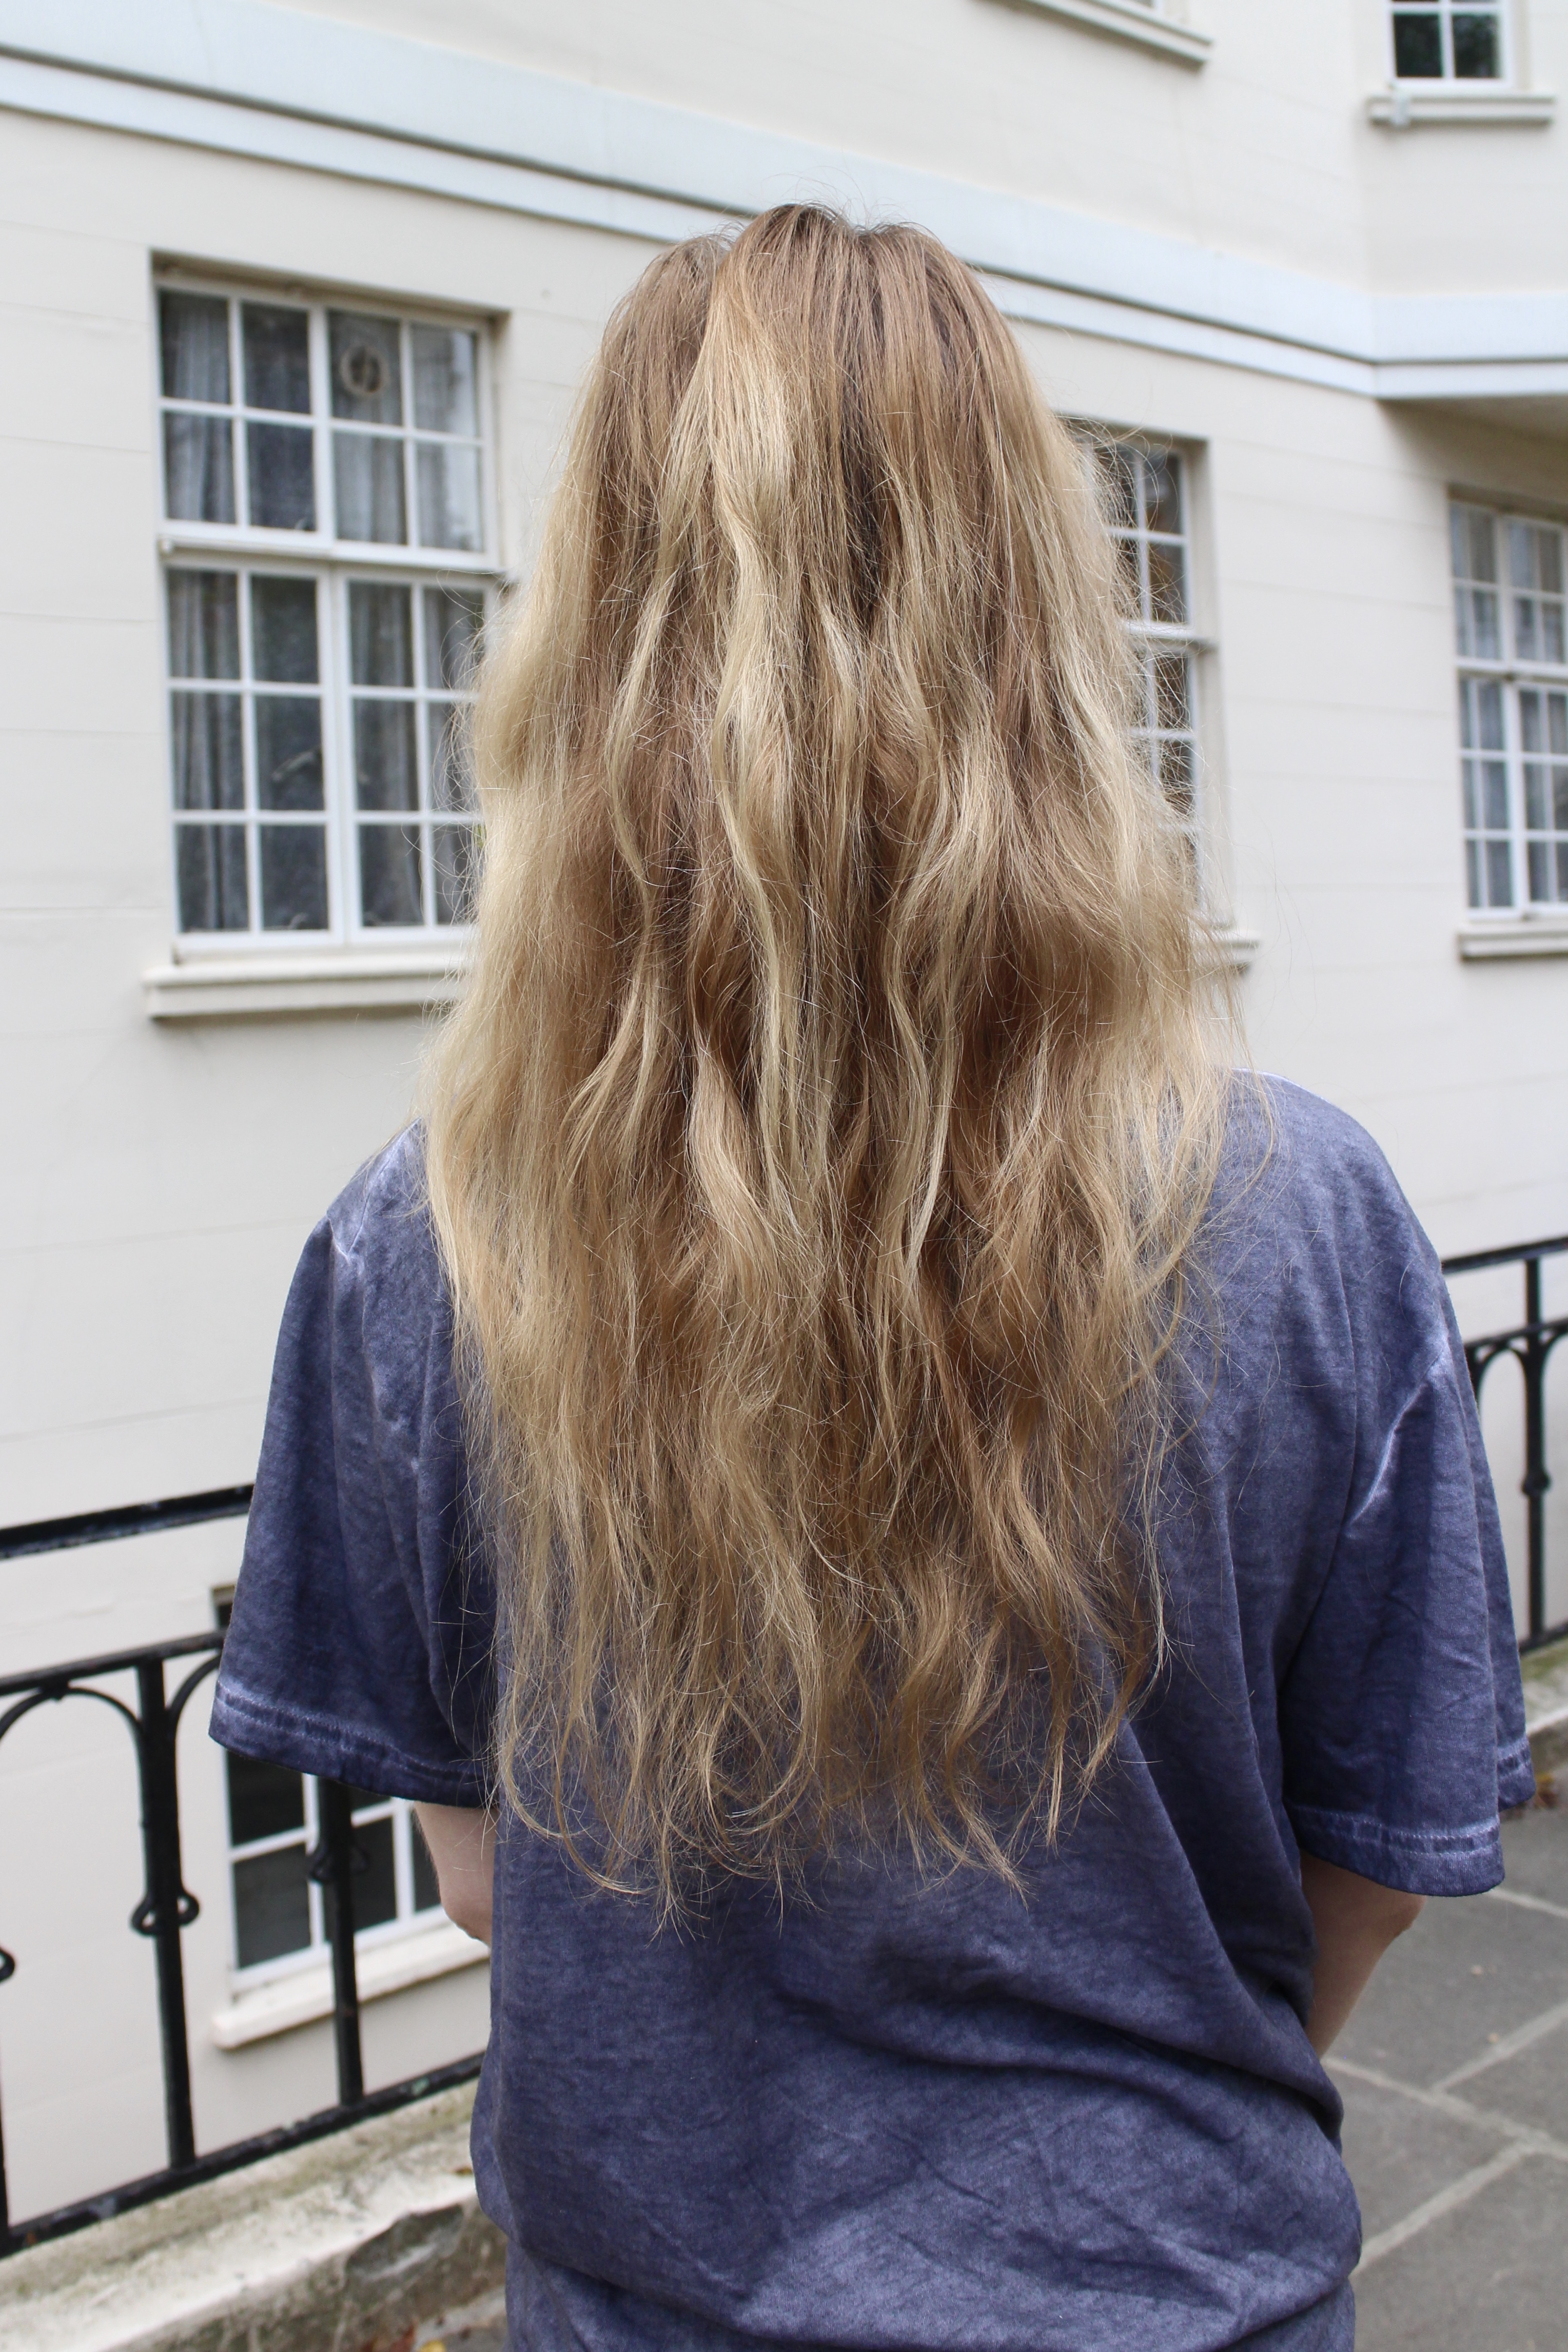 Irresistible Me Hair Extensions: Get the Look